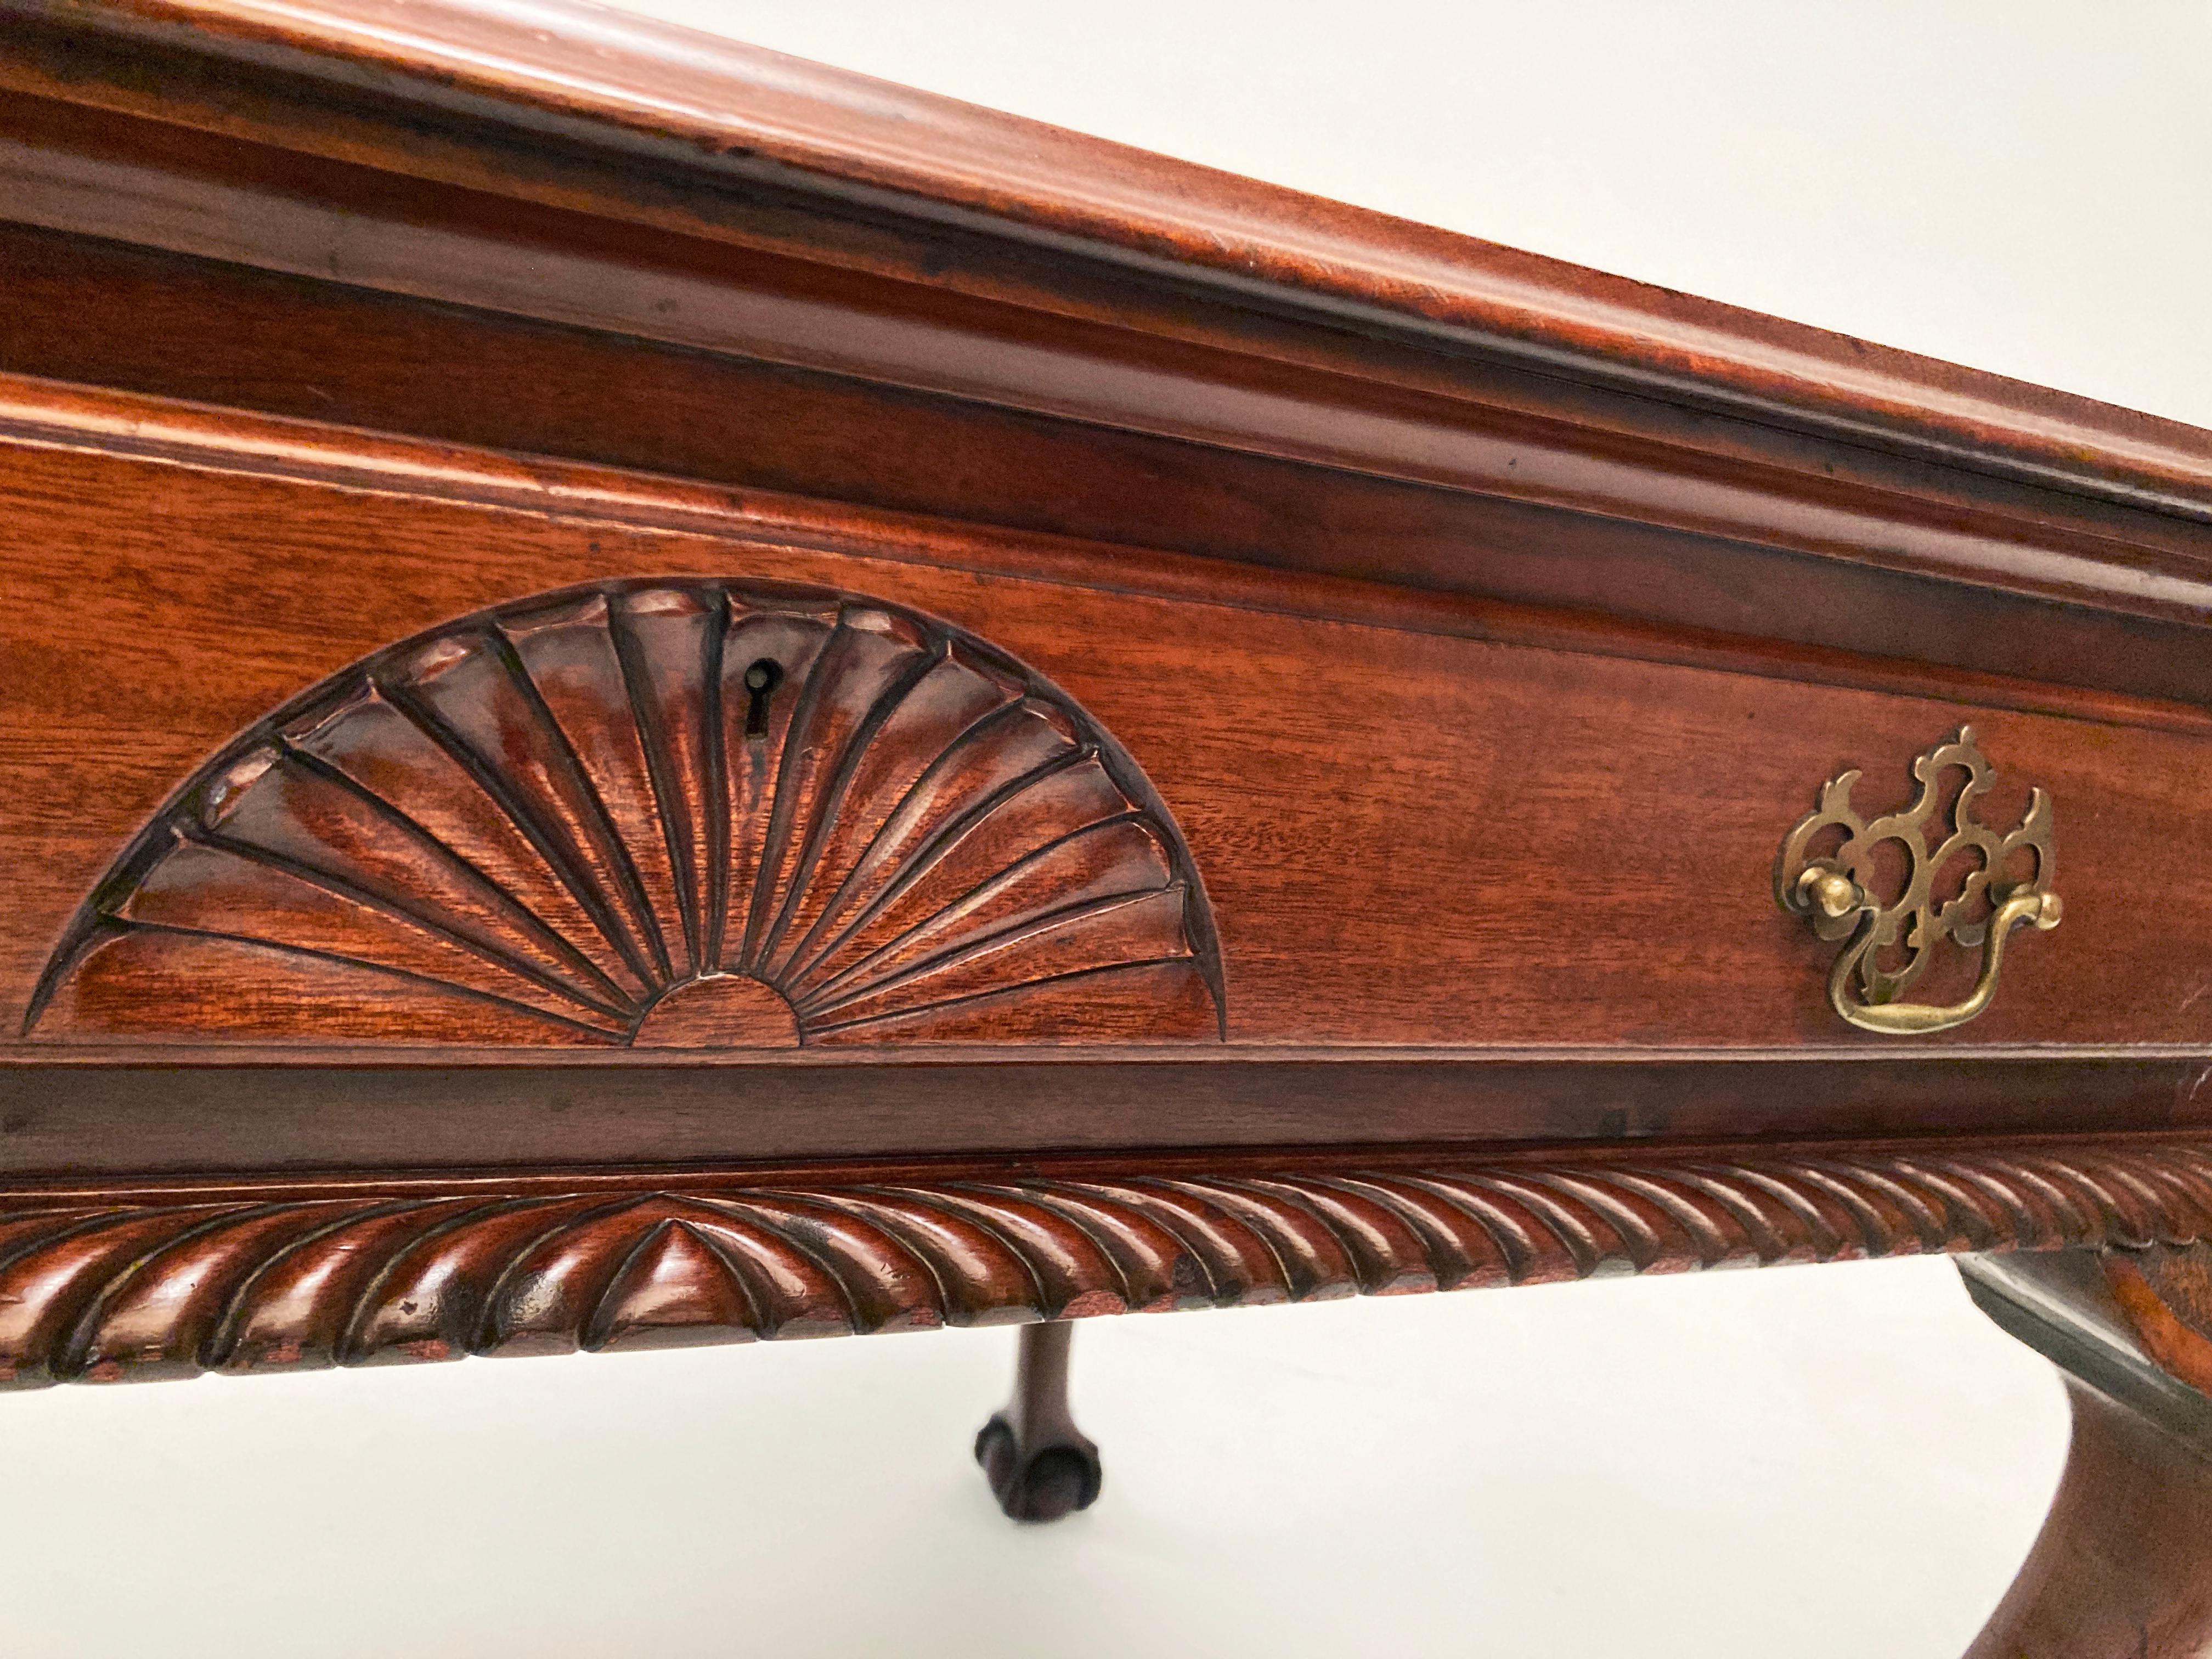 Single Drawer Mahogany Chippendale Table Ball Claw Feet English Mid 19th Century For Sale 4